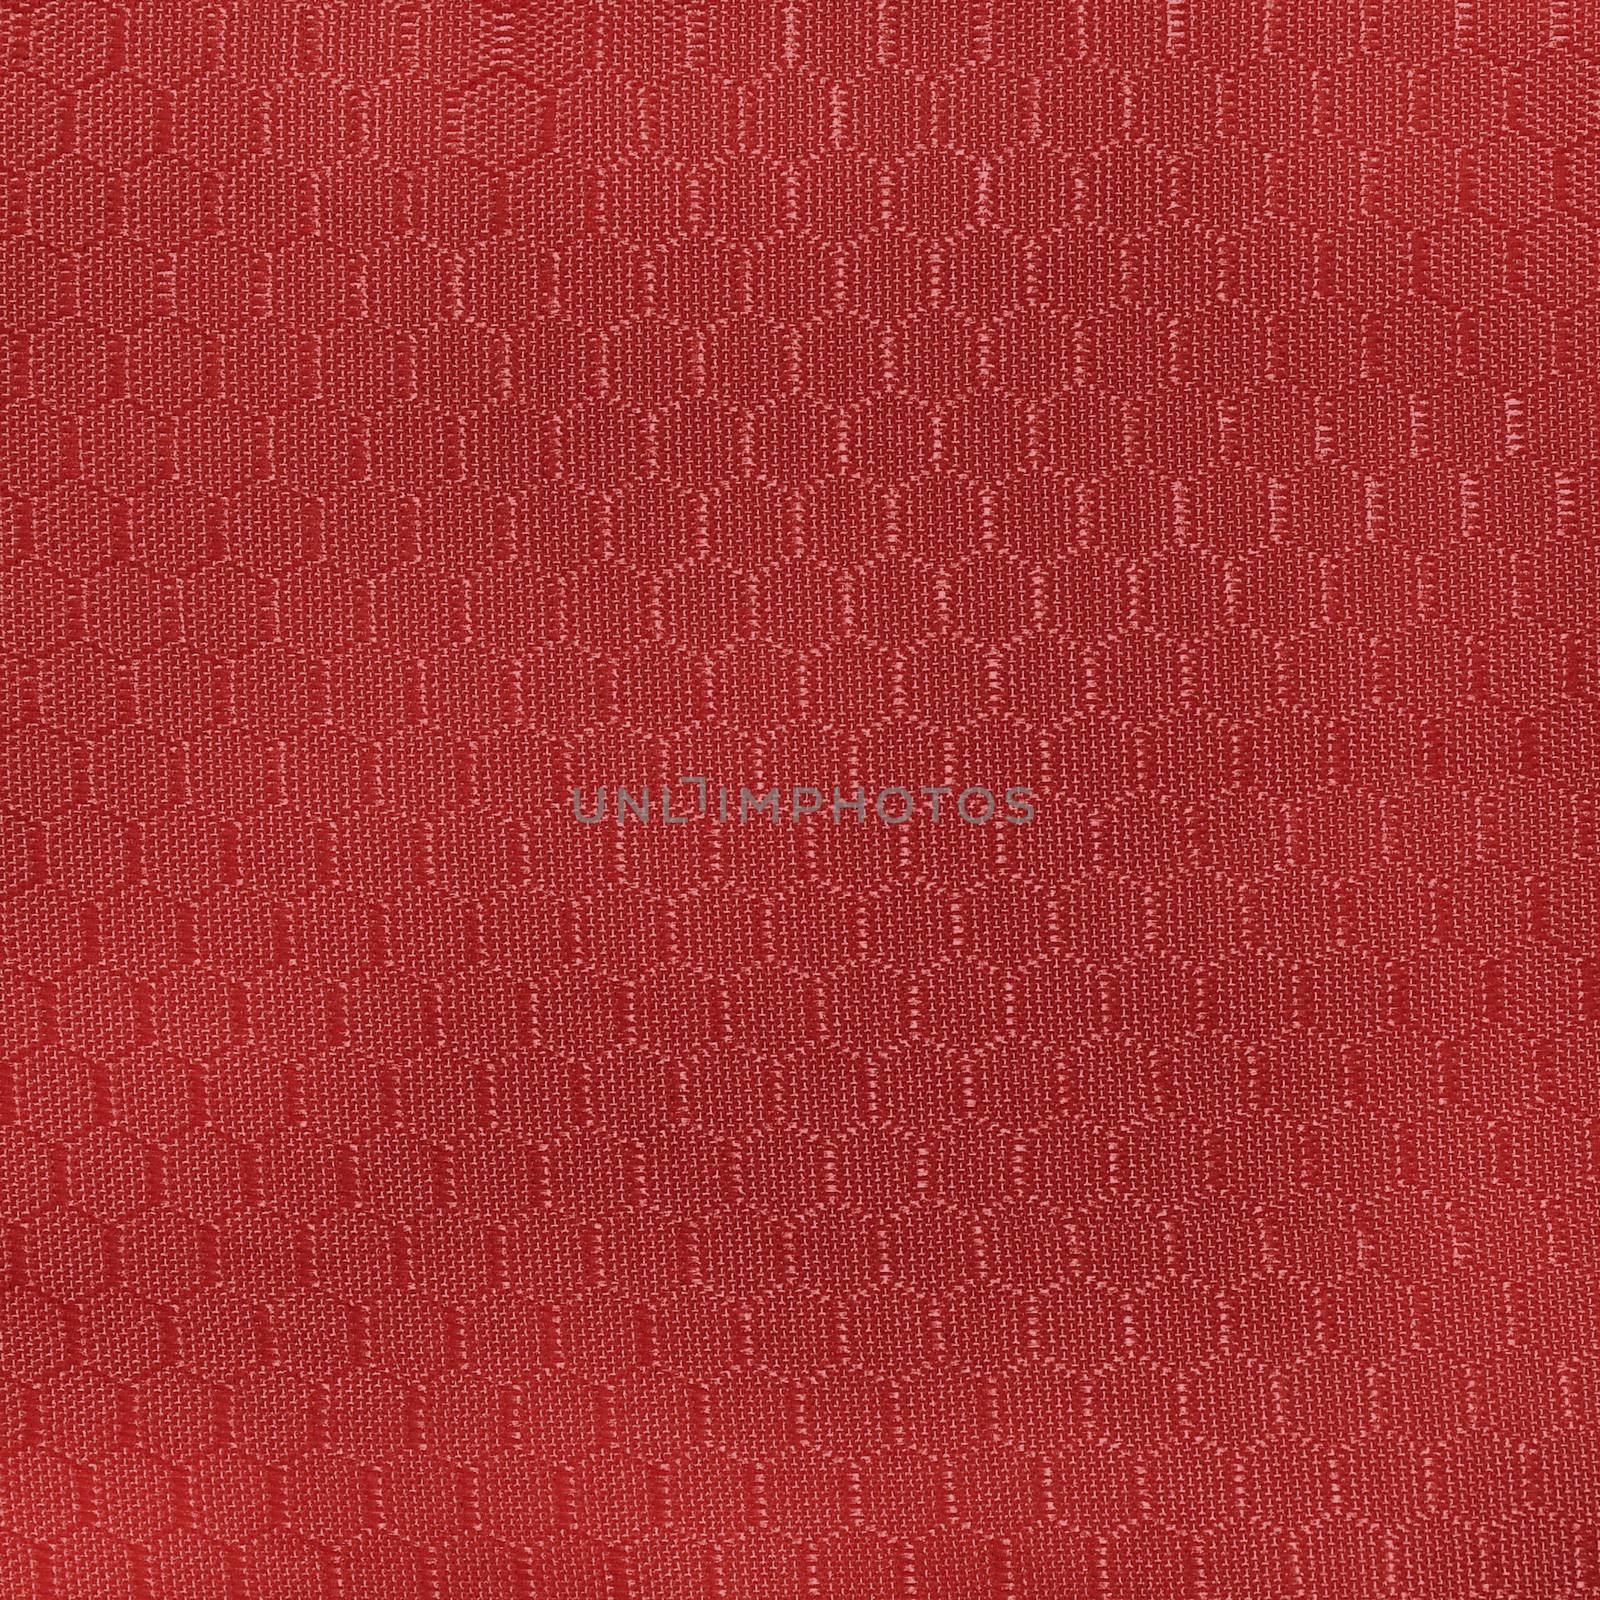 Fabric with geometric pattern in the form of honeycomb.Texture or background by Mastak80